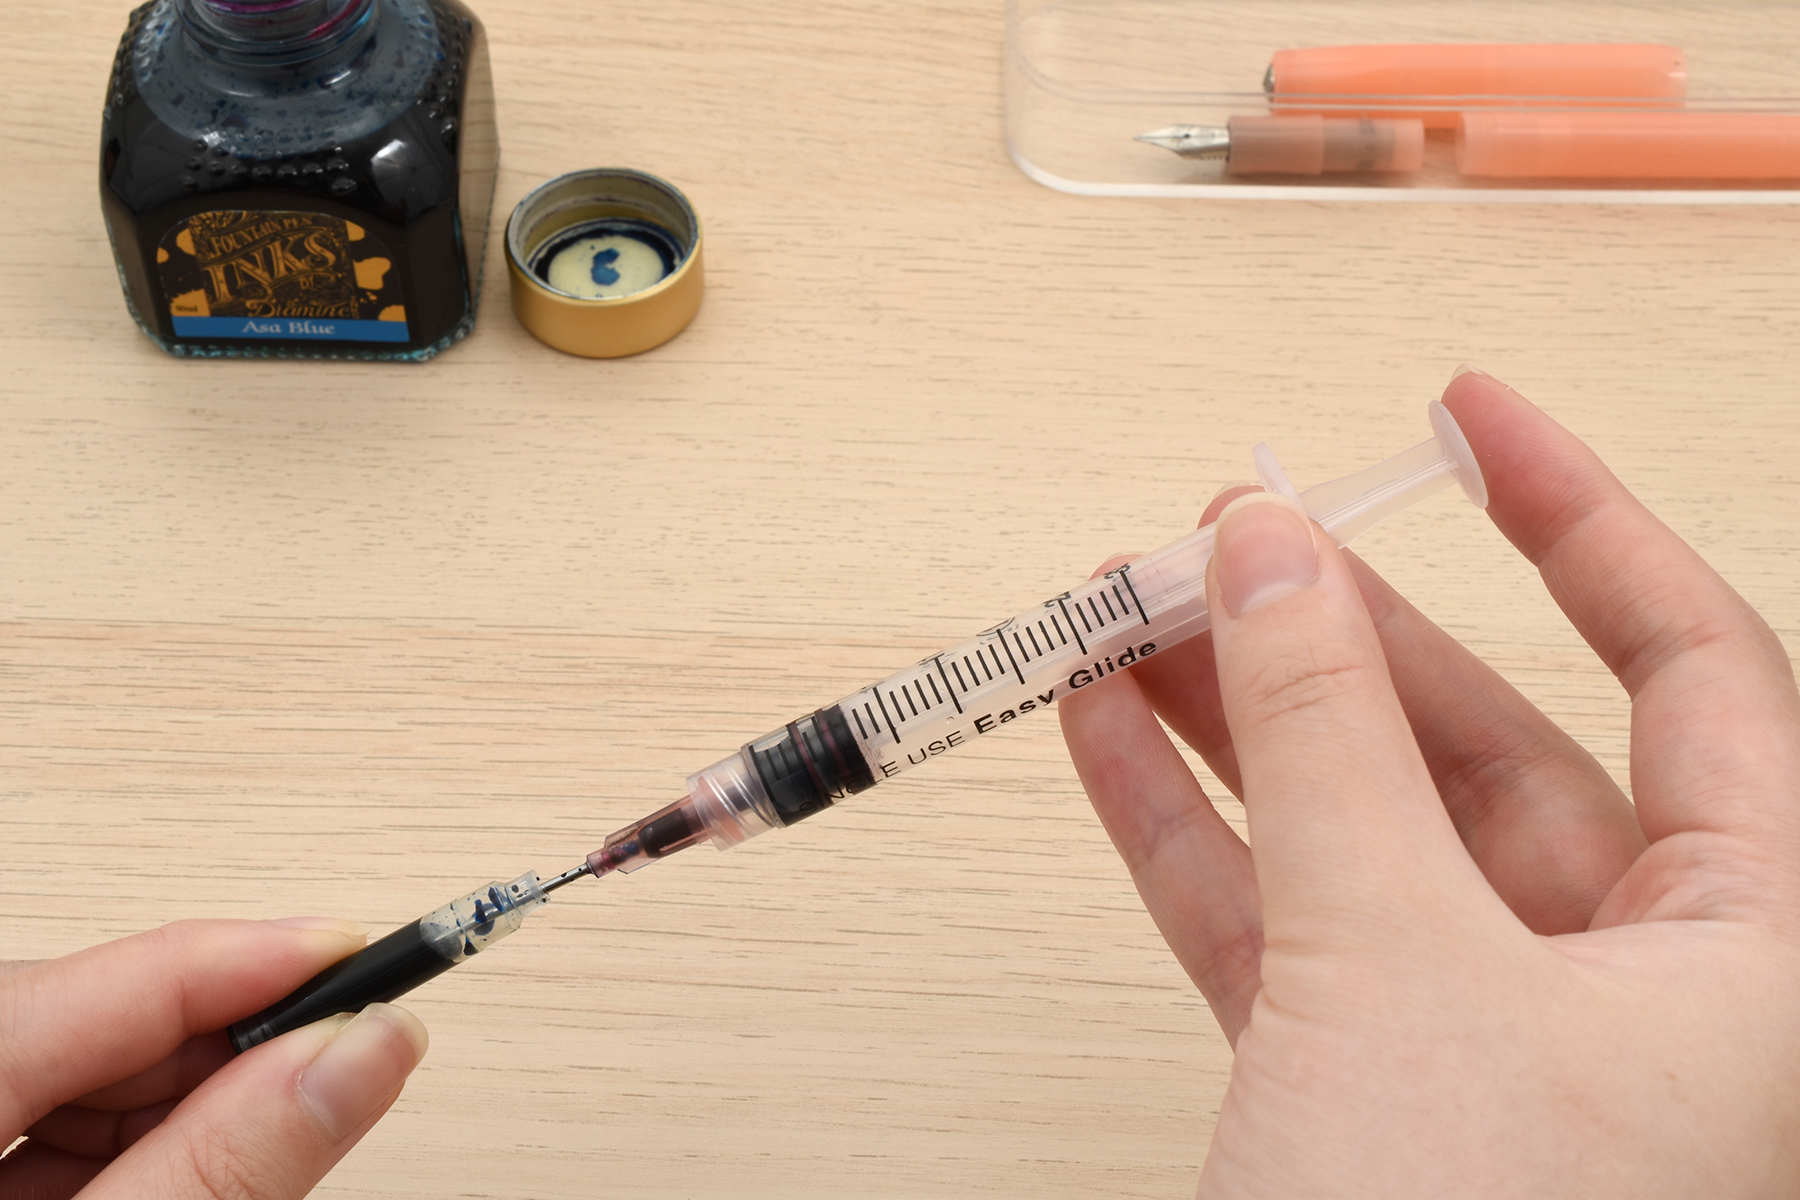 How to Refill an Ink Cartridge Using a Syringe